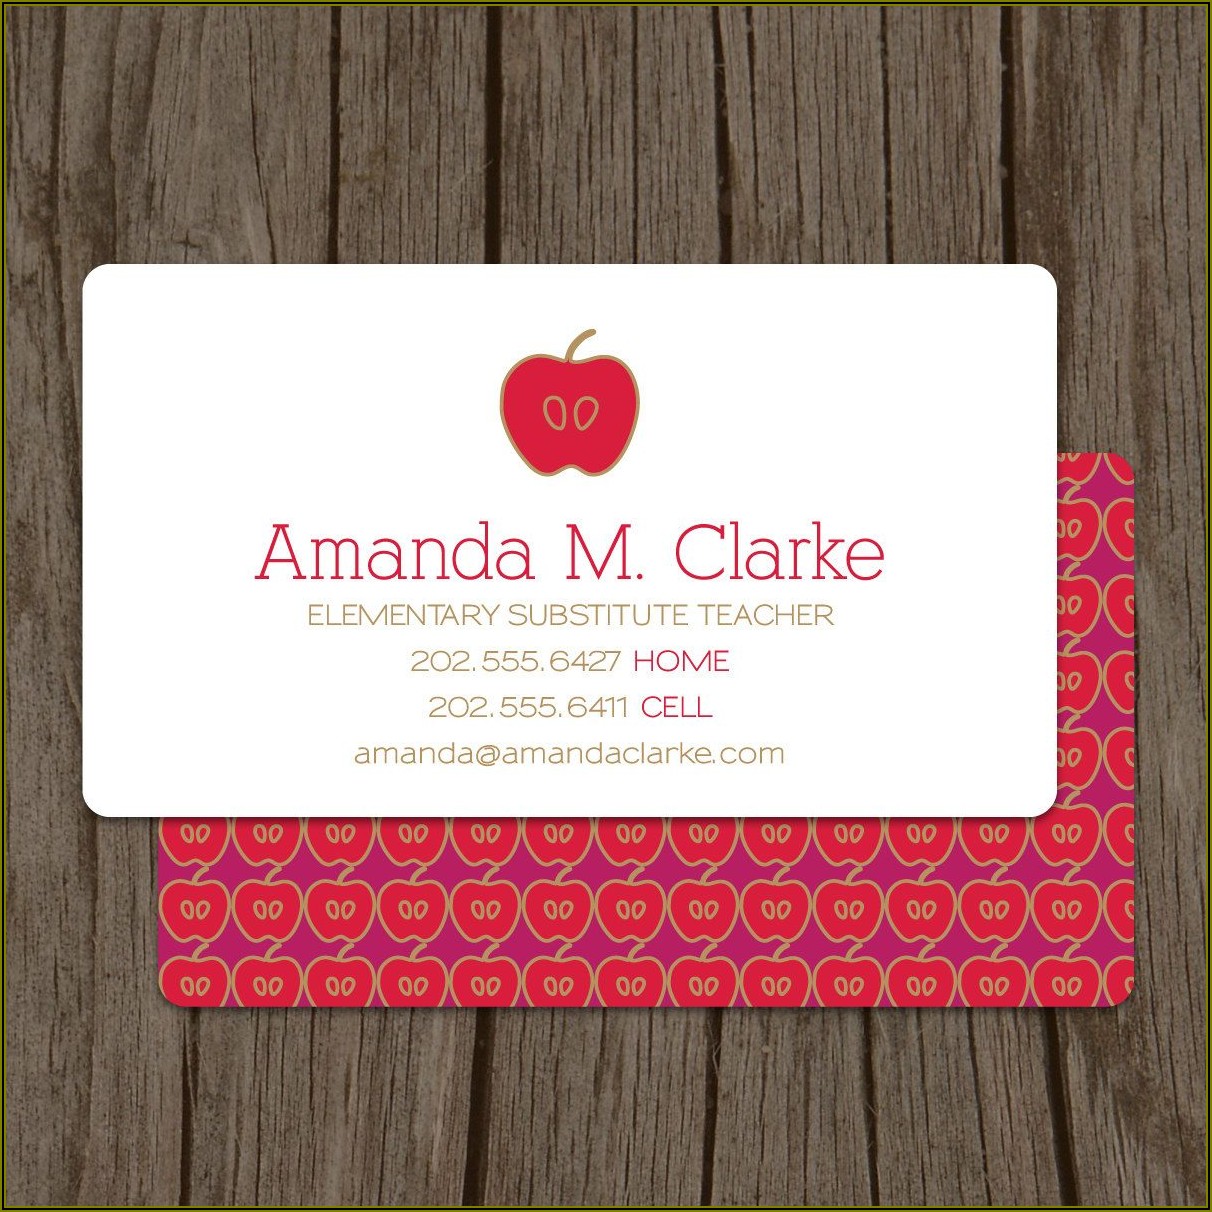 Substitute Teacher Business Cards Examples